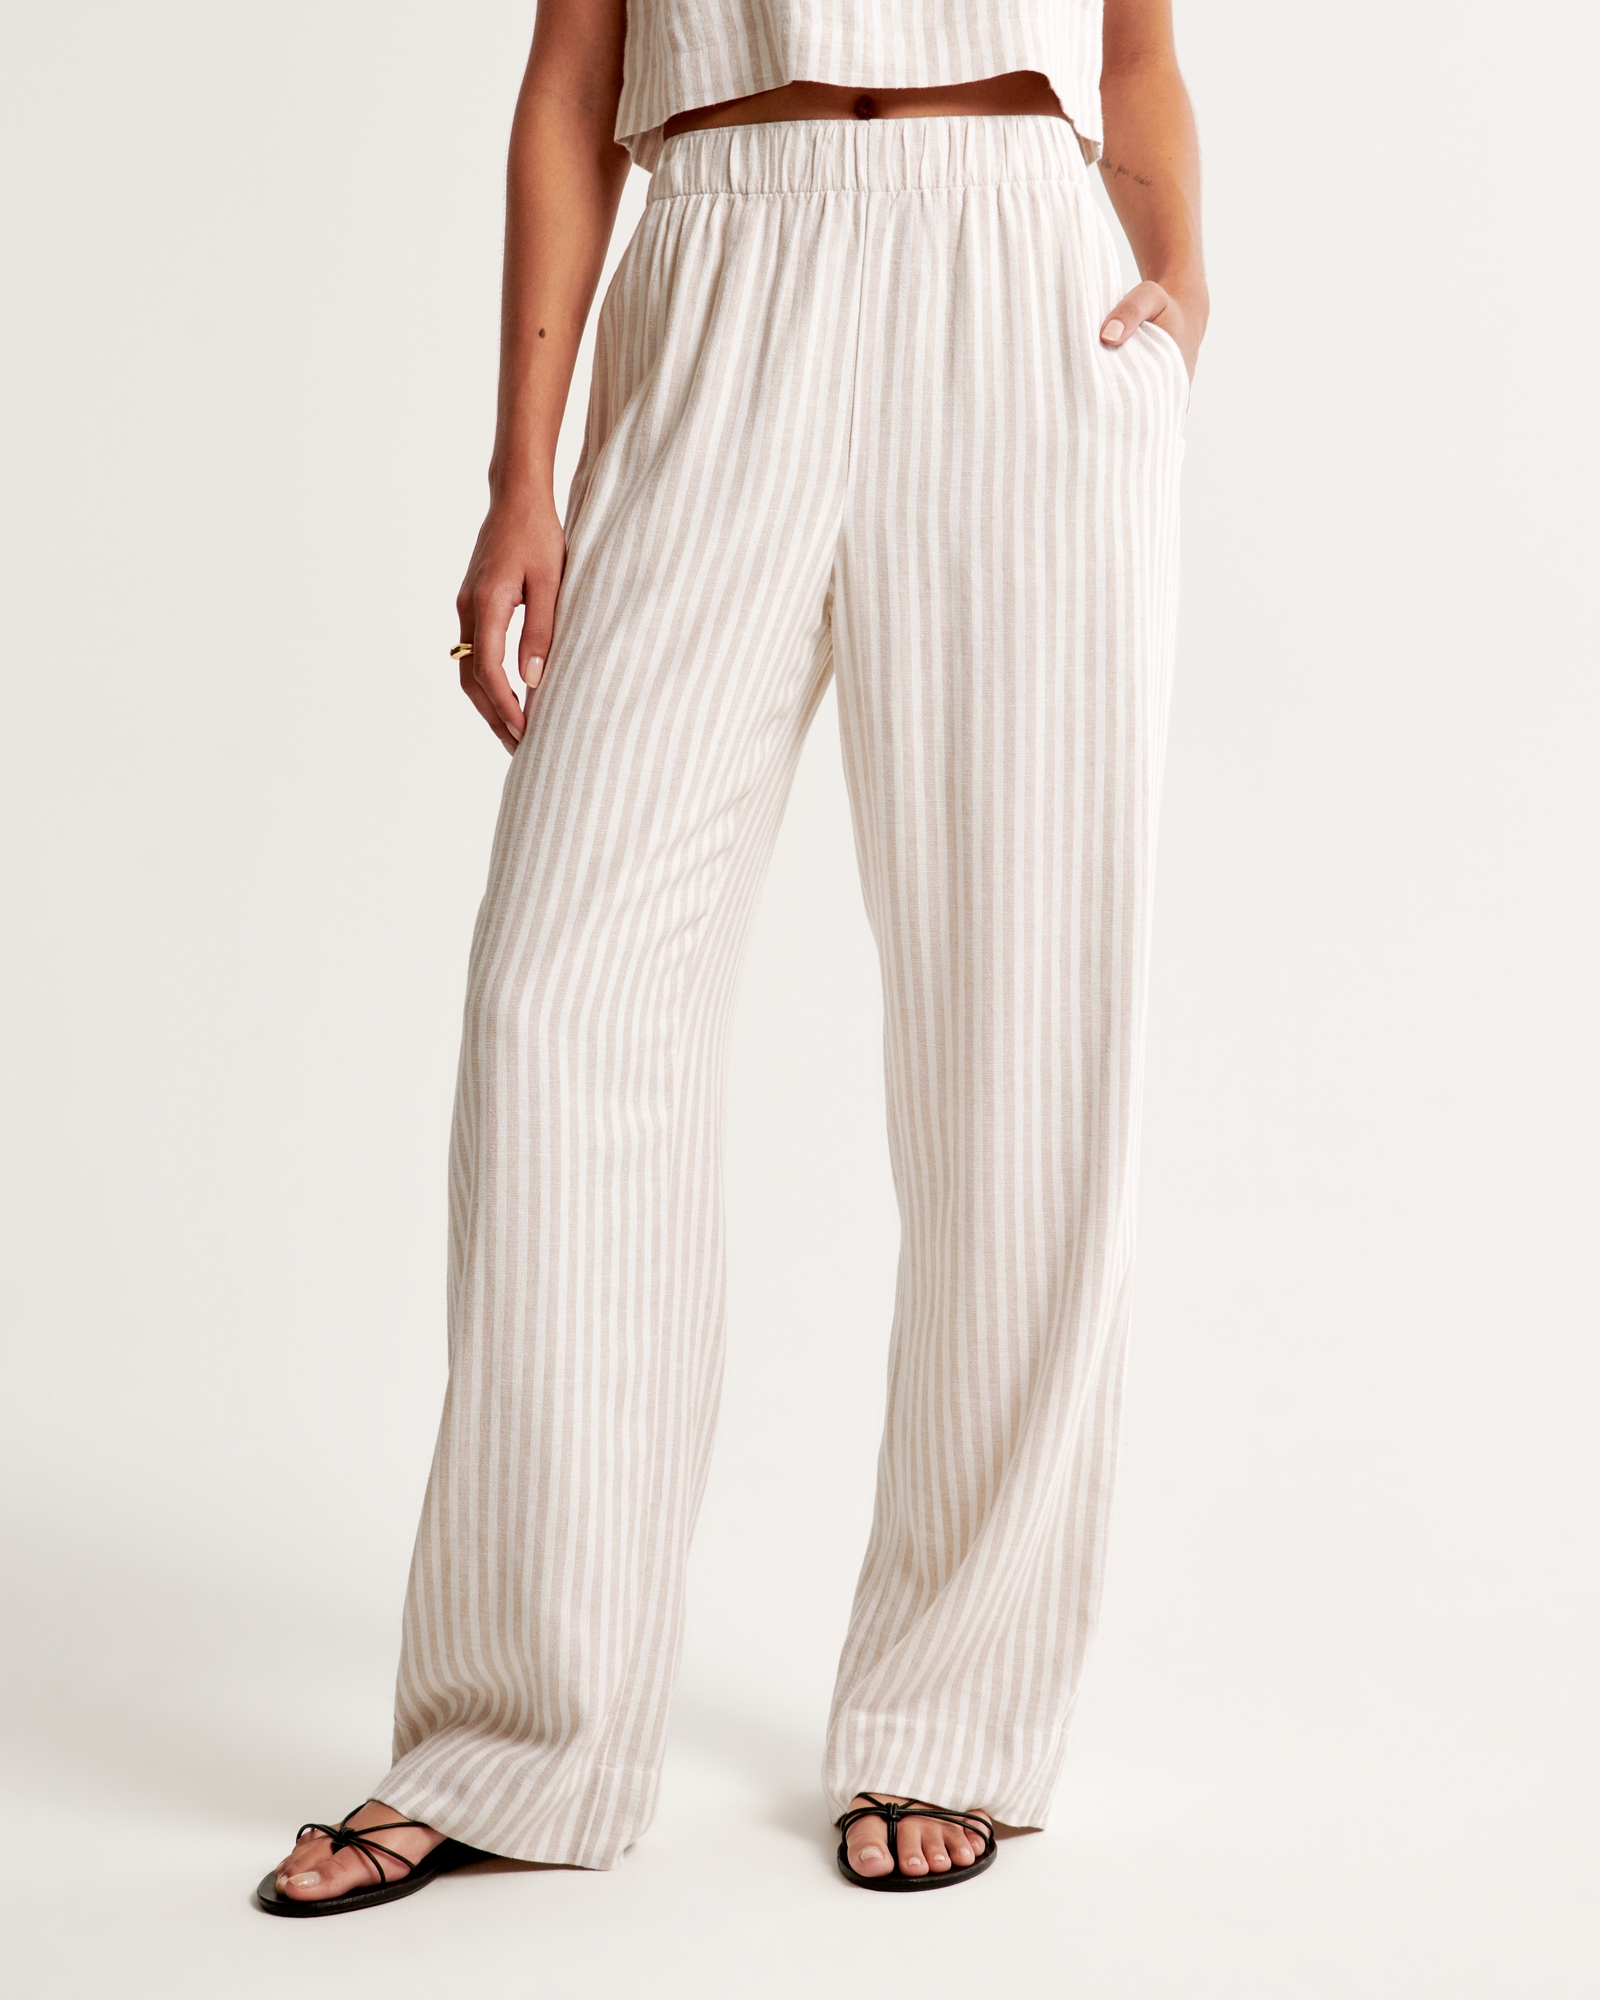 Linen-Blend High-Waist Pull-On Pant in Trousers